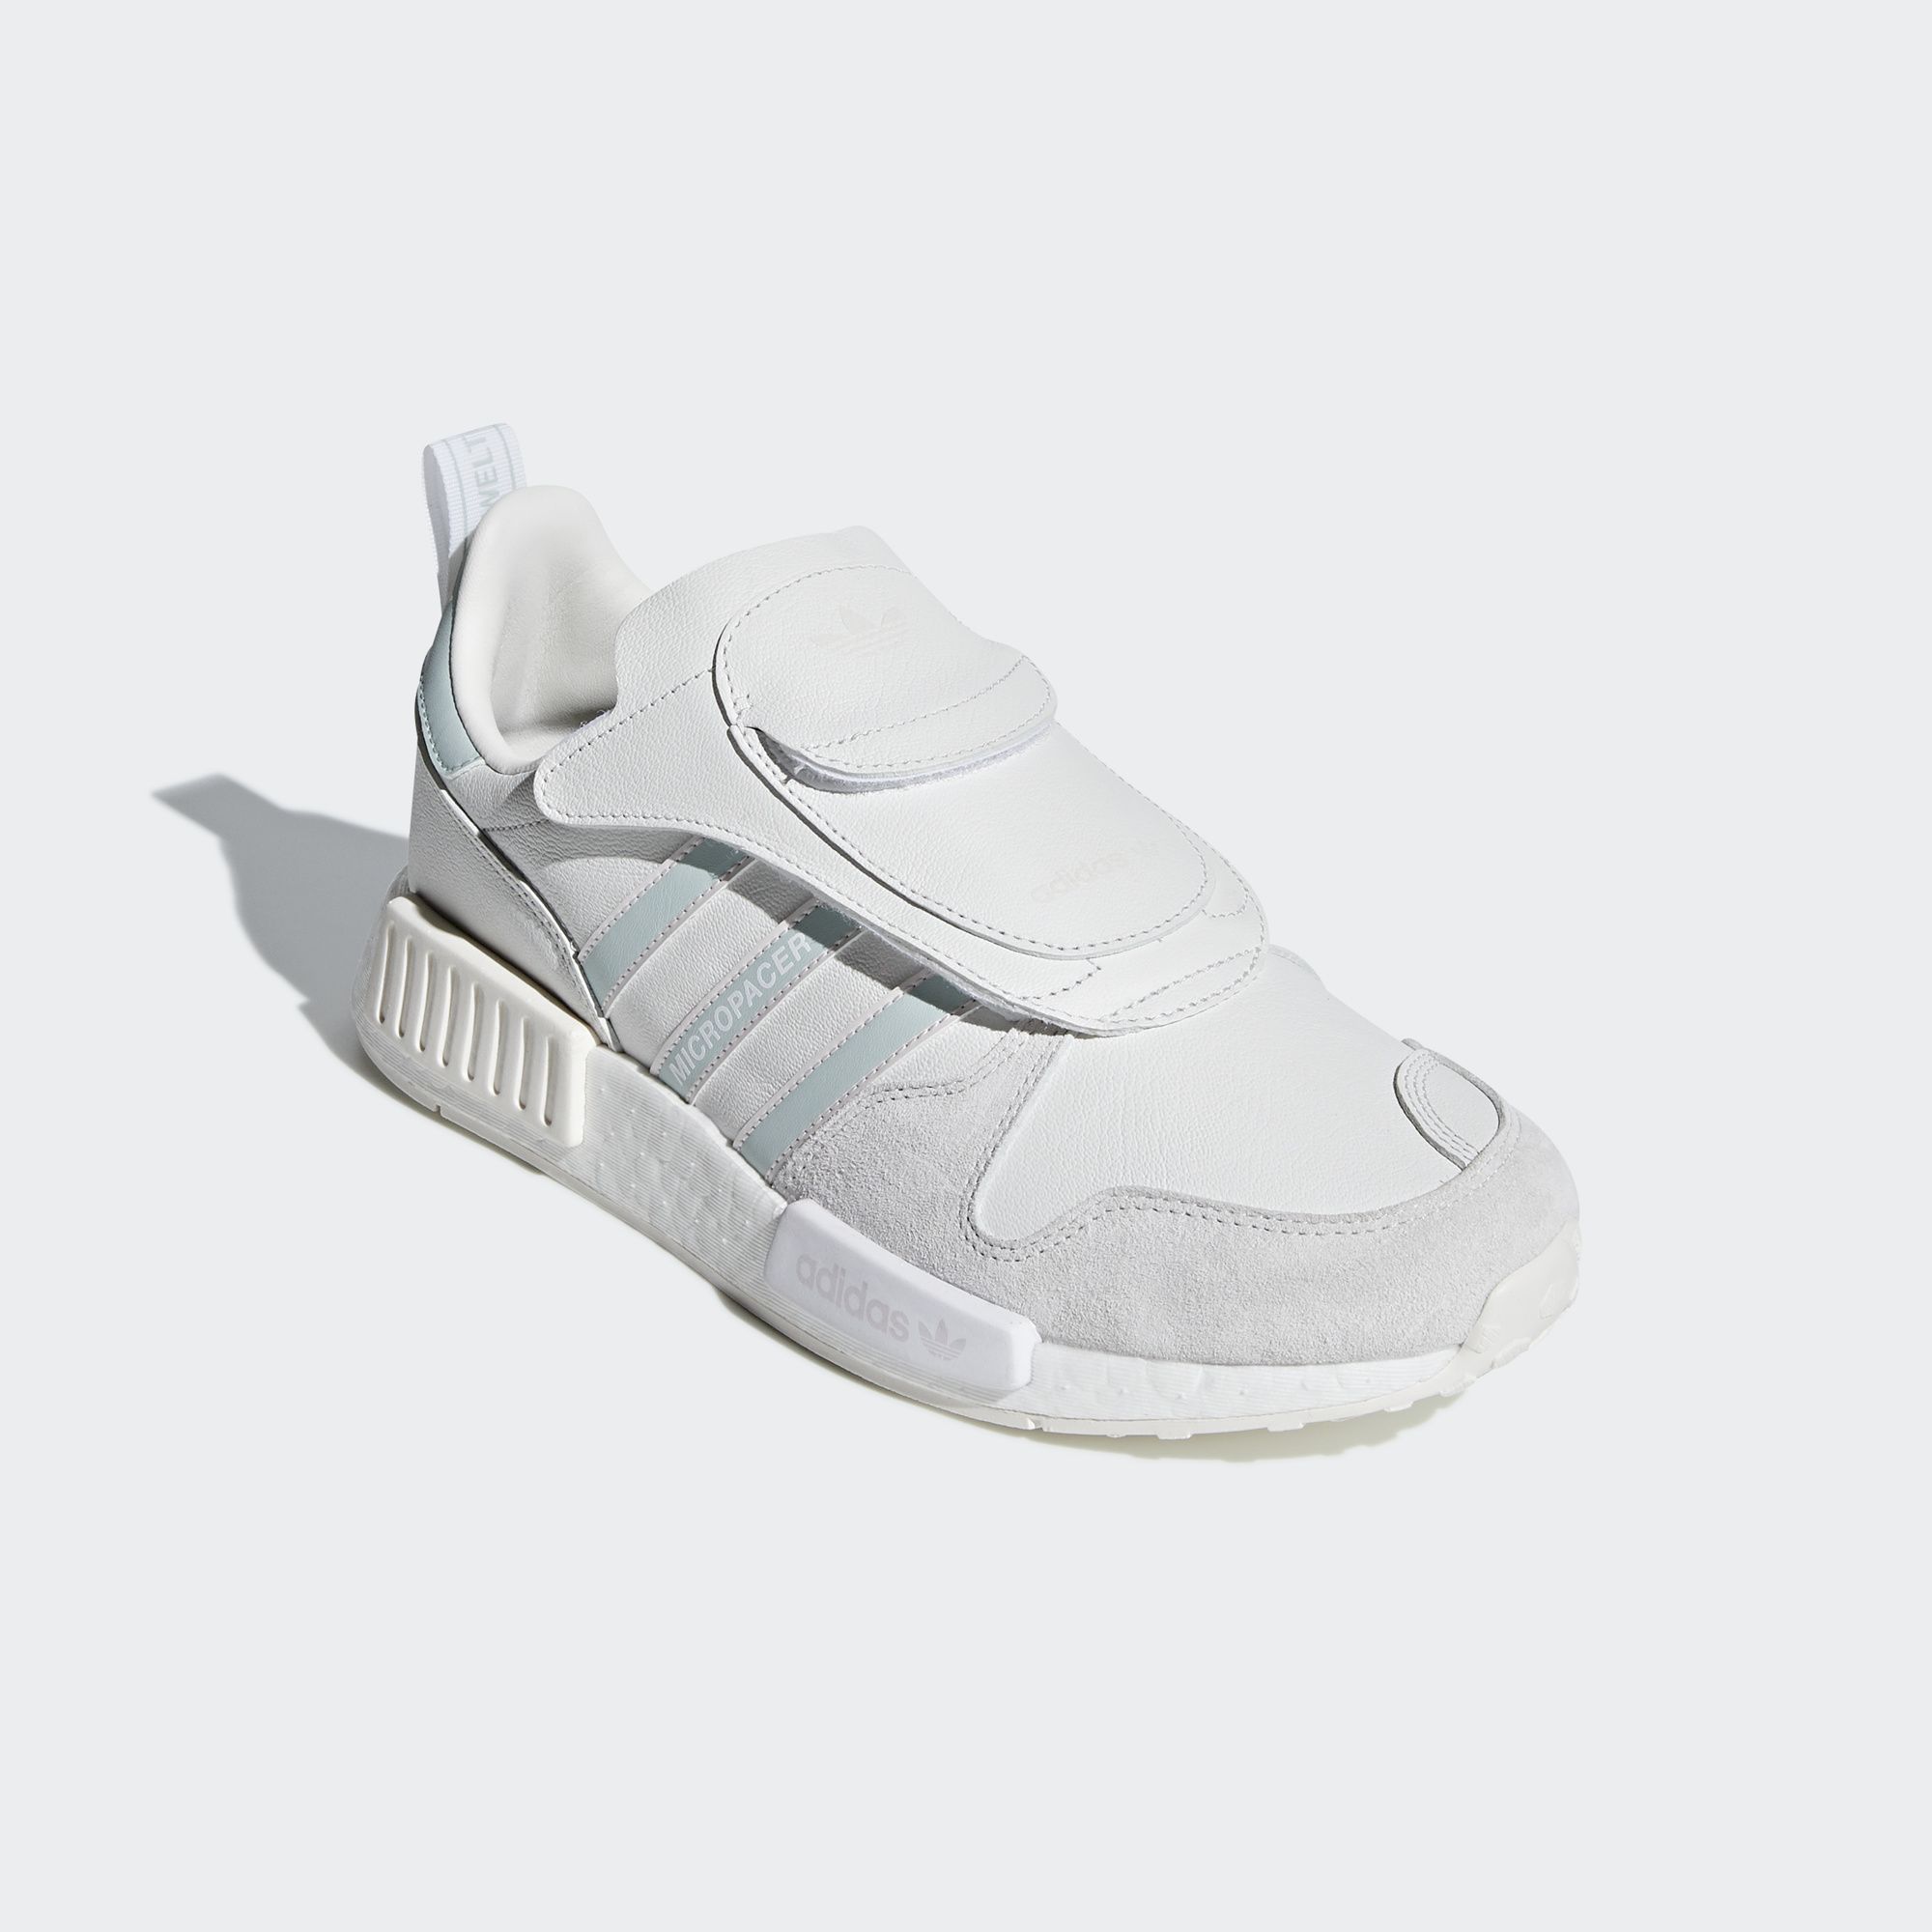 adidas,Micropacer XR1,发售  小清新与科幻结合！adidas Micropacer XR1 即将发售